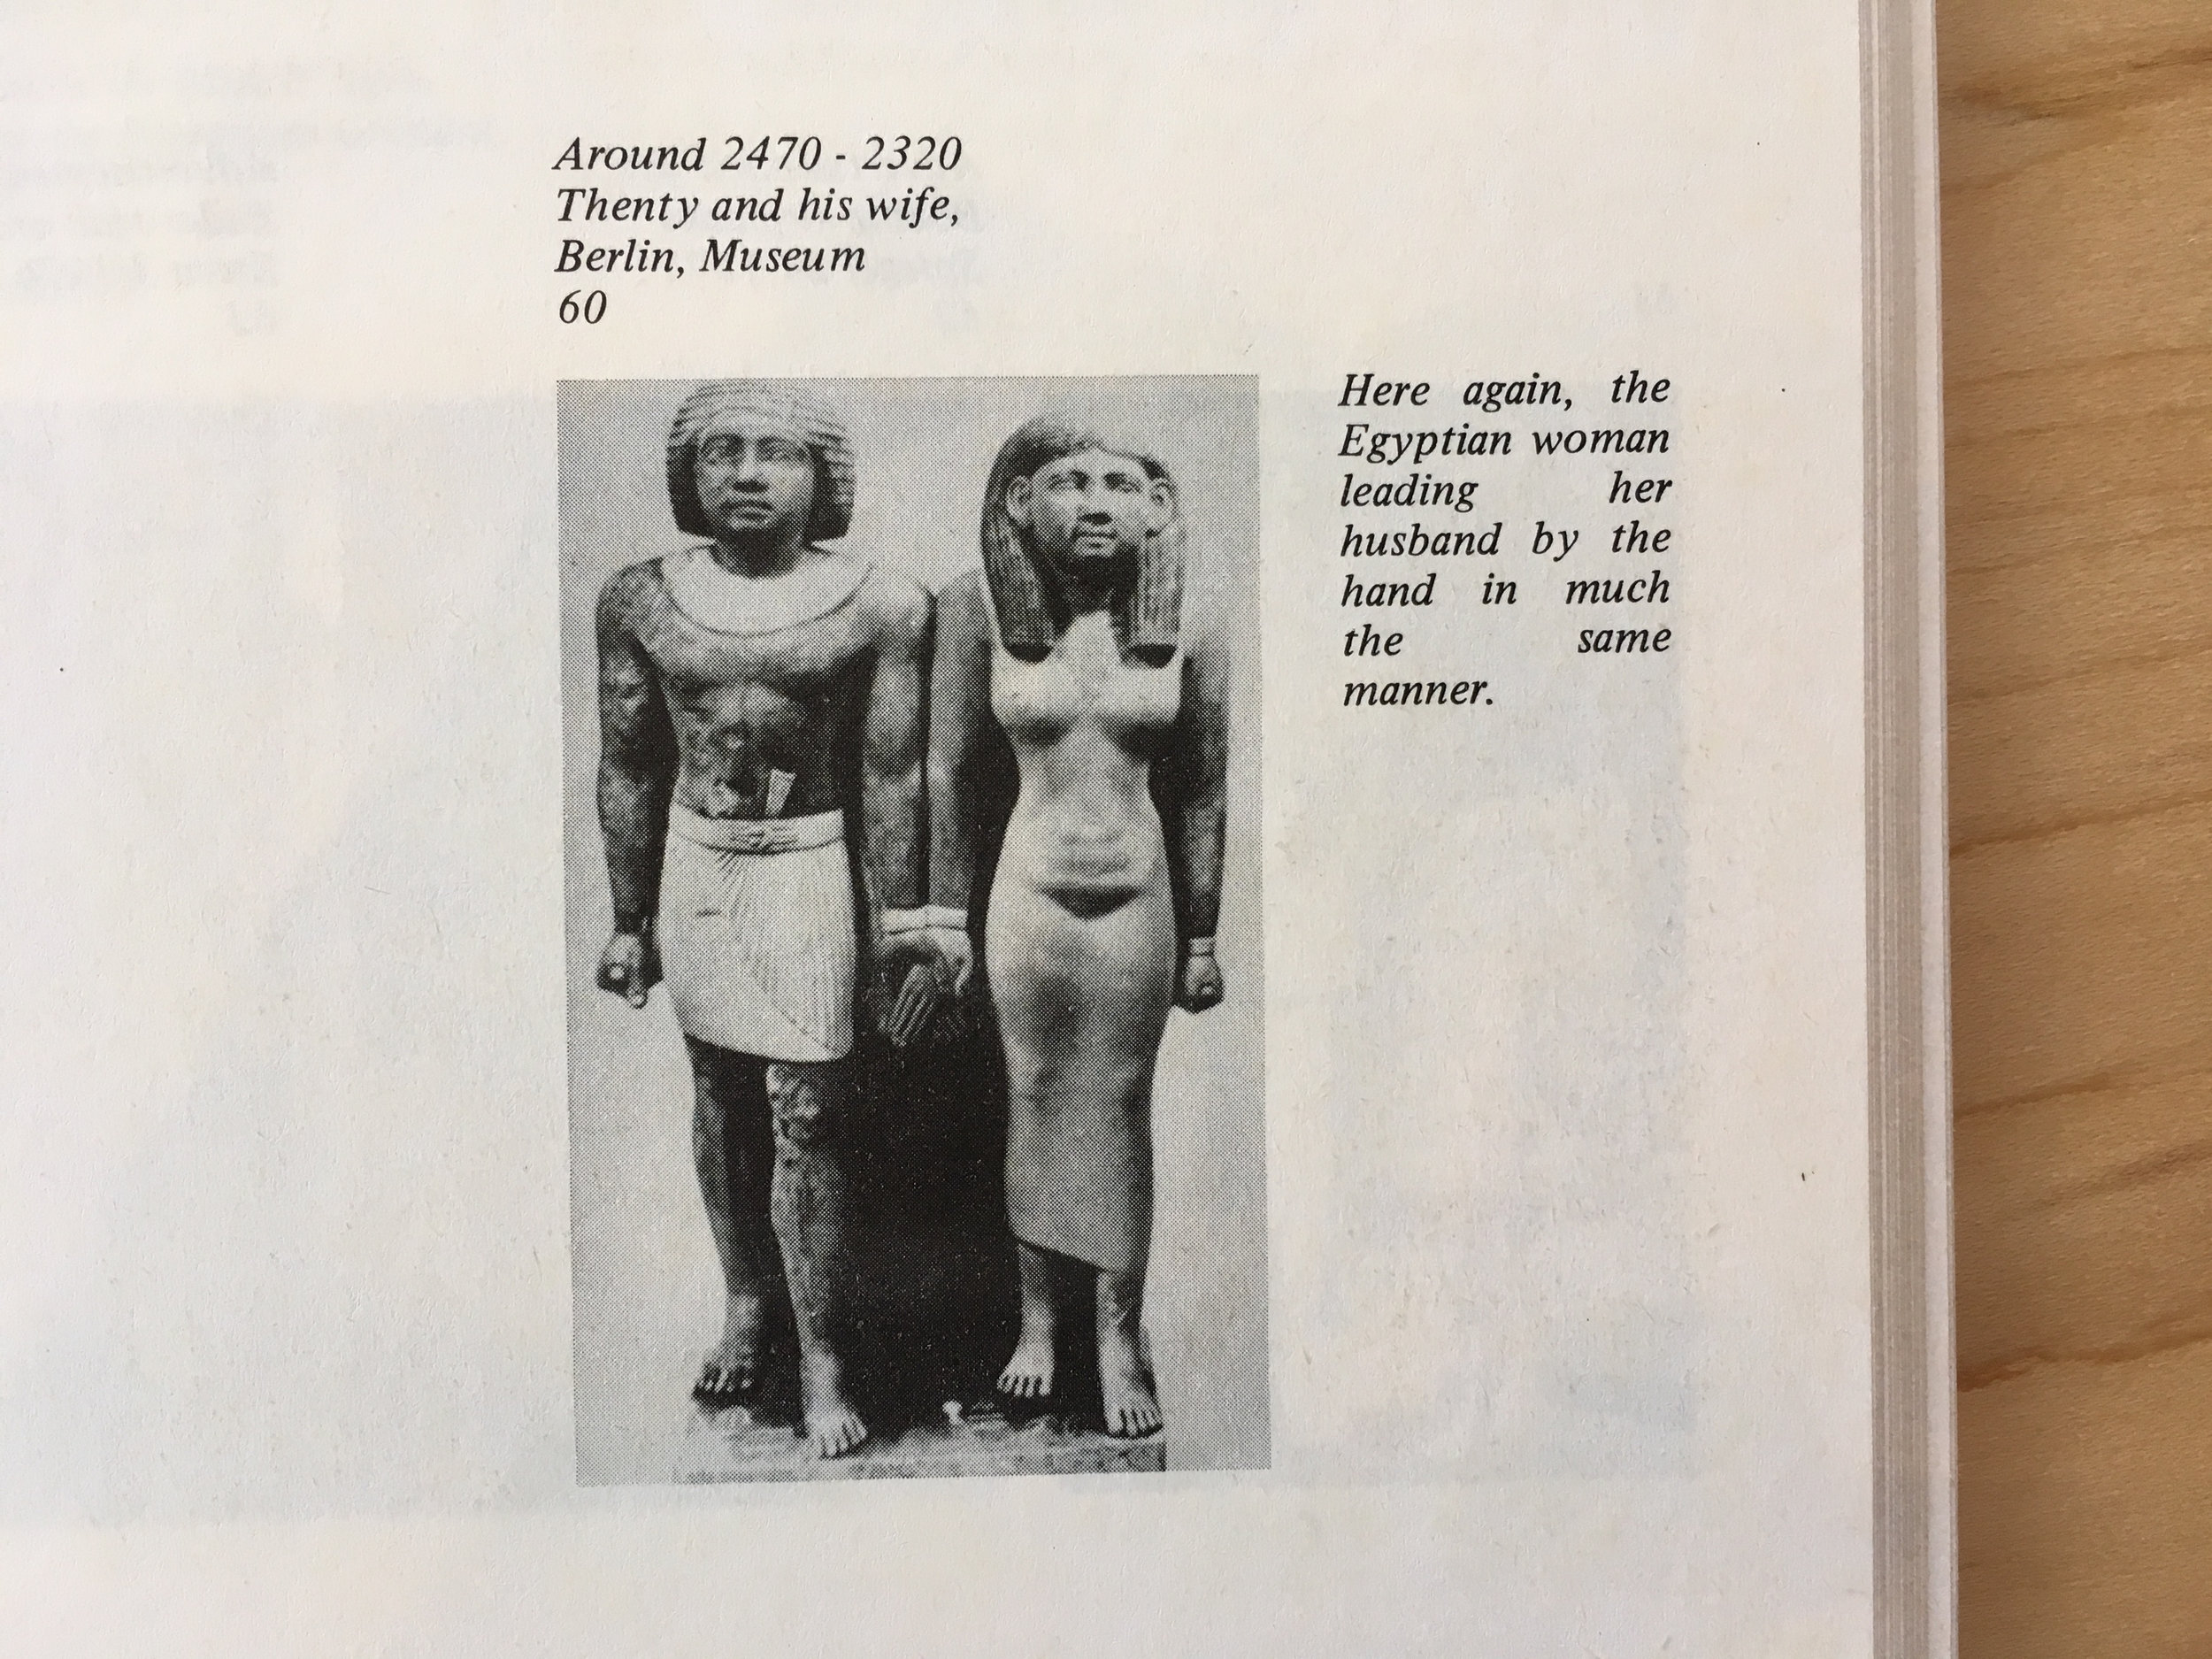  Detail: Marianne Wex,  ‘Let’s Take Back Our Space’: “Female” and “Male” Body Language as a Result of Patriarchal Structure  (Germany: Frauenliteratur Verlag, 1984). 